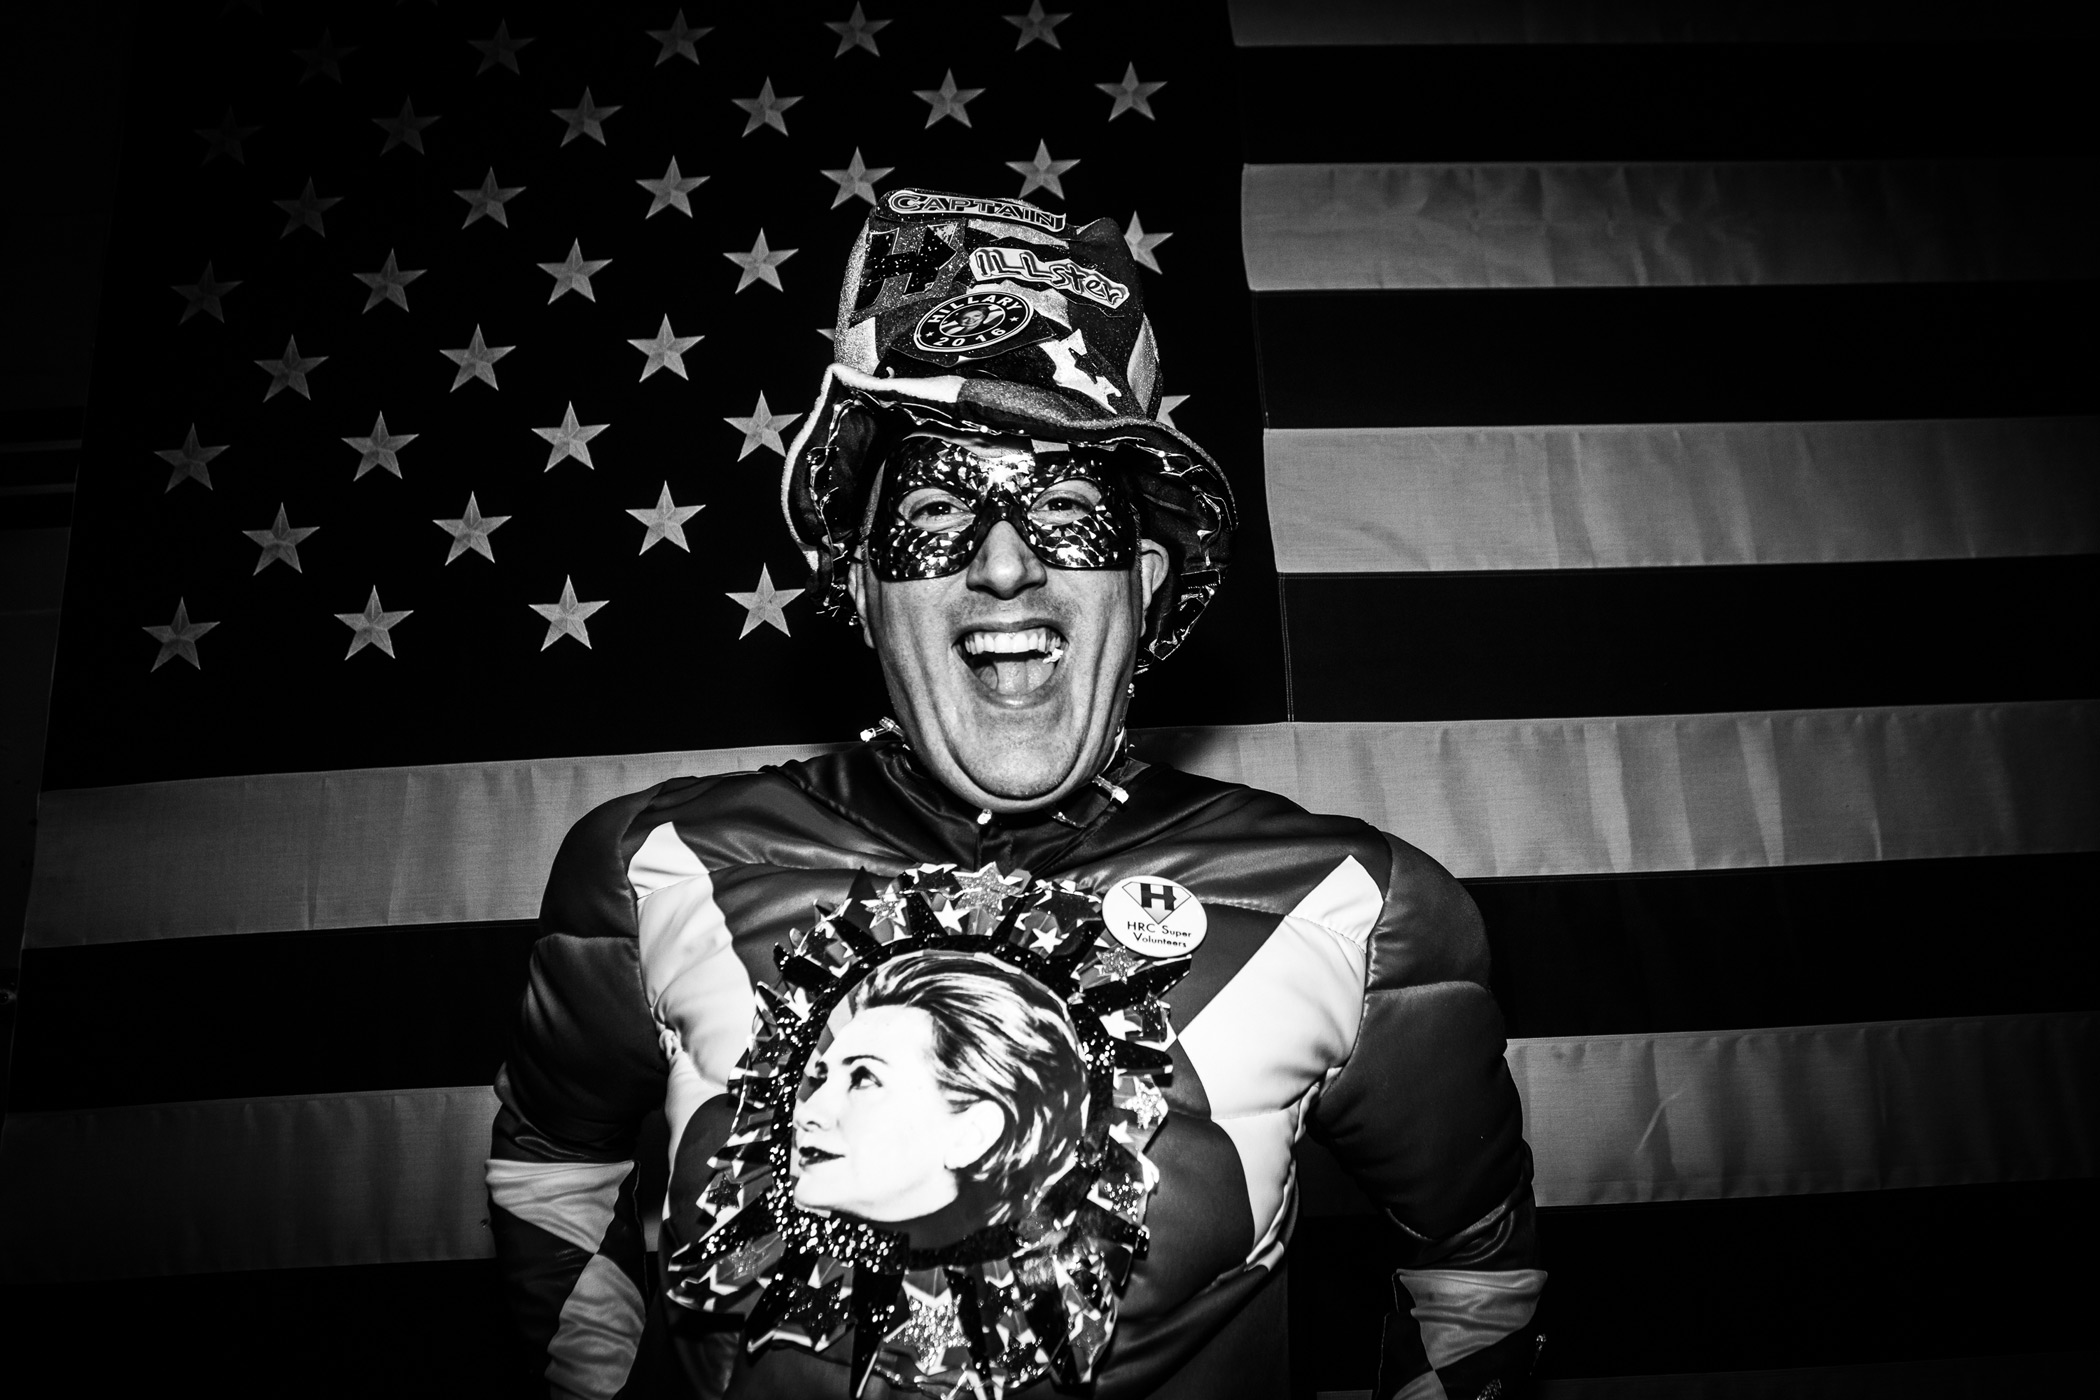 Clinton Jesse, known as Captain Hillster, poses for photos at an event for Hillary Clinton in Seattle on March 22.